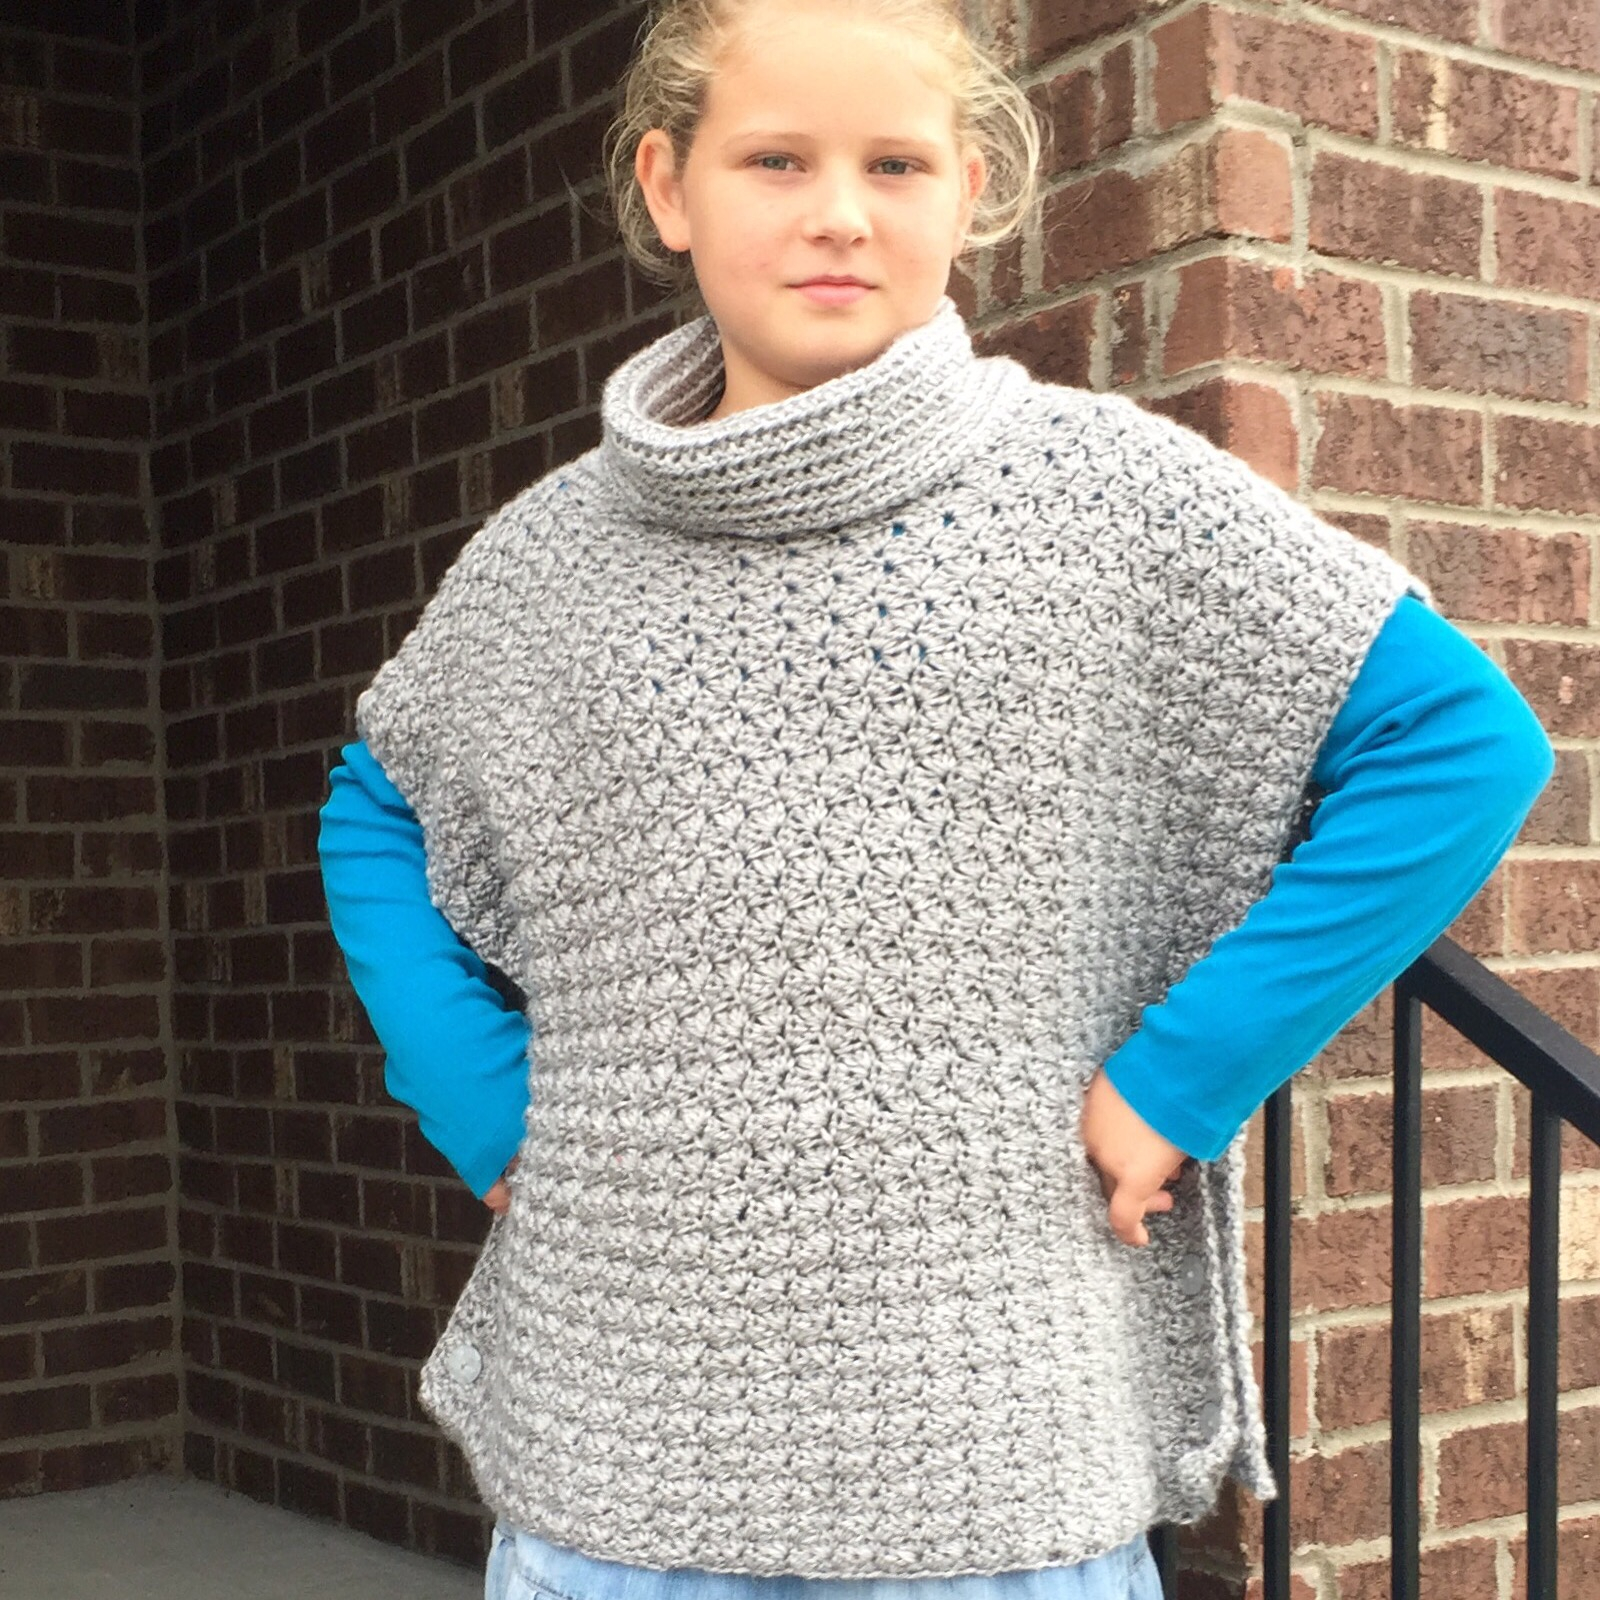 Knitting Pattern For Childs Poncho Crochet Pattern Fiona Poncho With Cowl For Babies Girls Teen Women